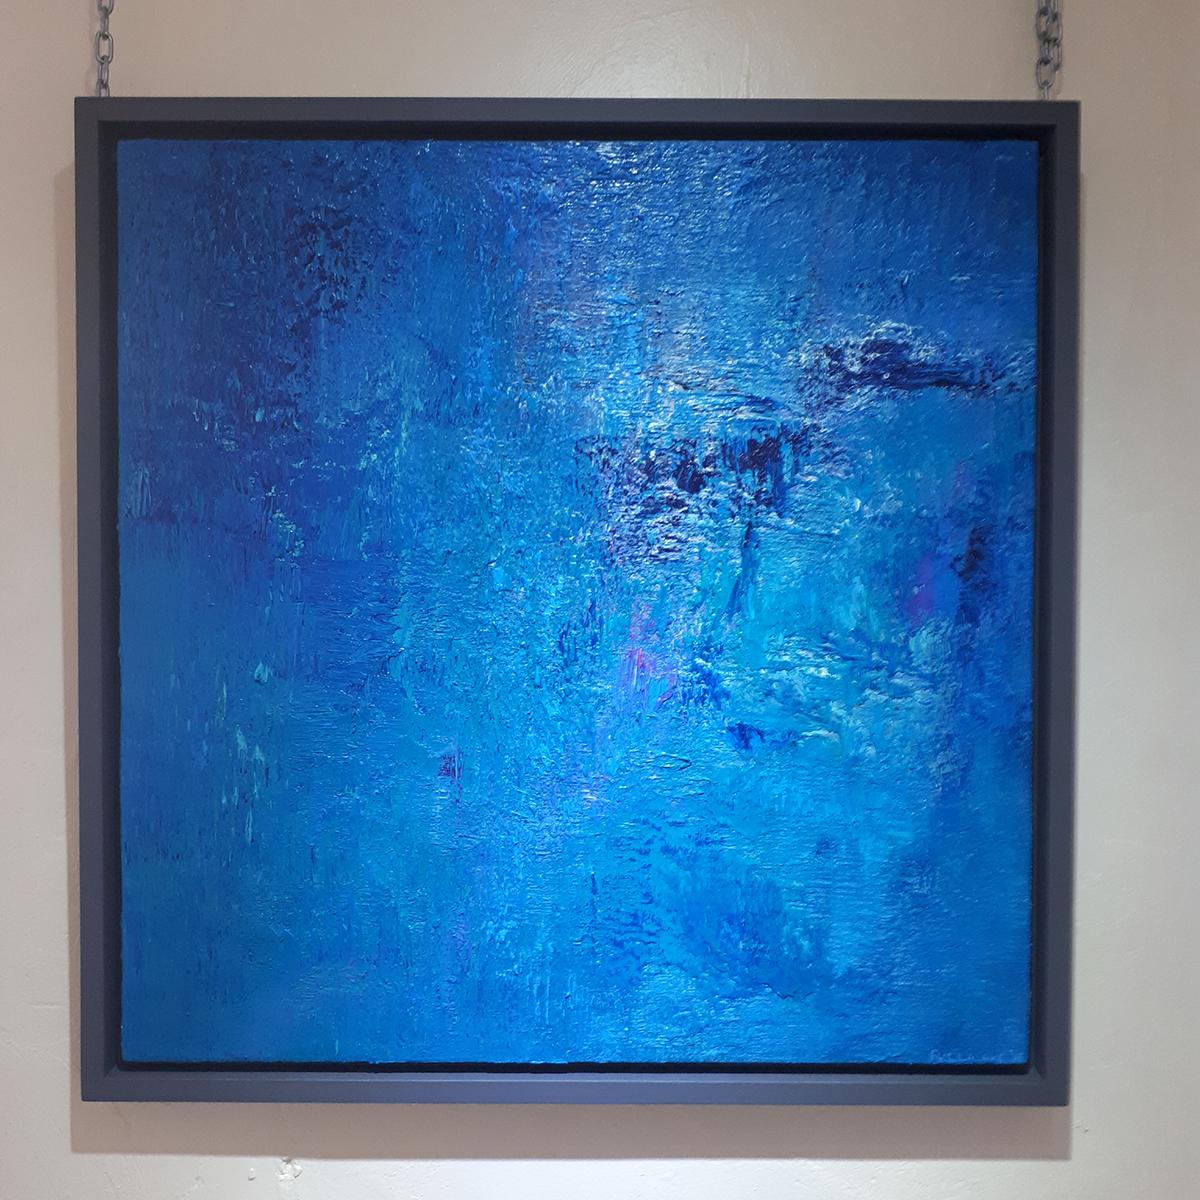 Stunning abstract work by this emerging British artist.

Oil on panel.